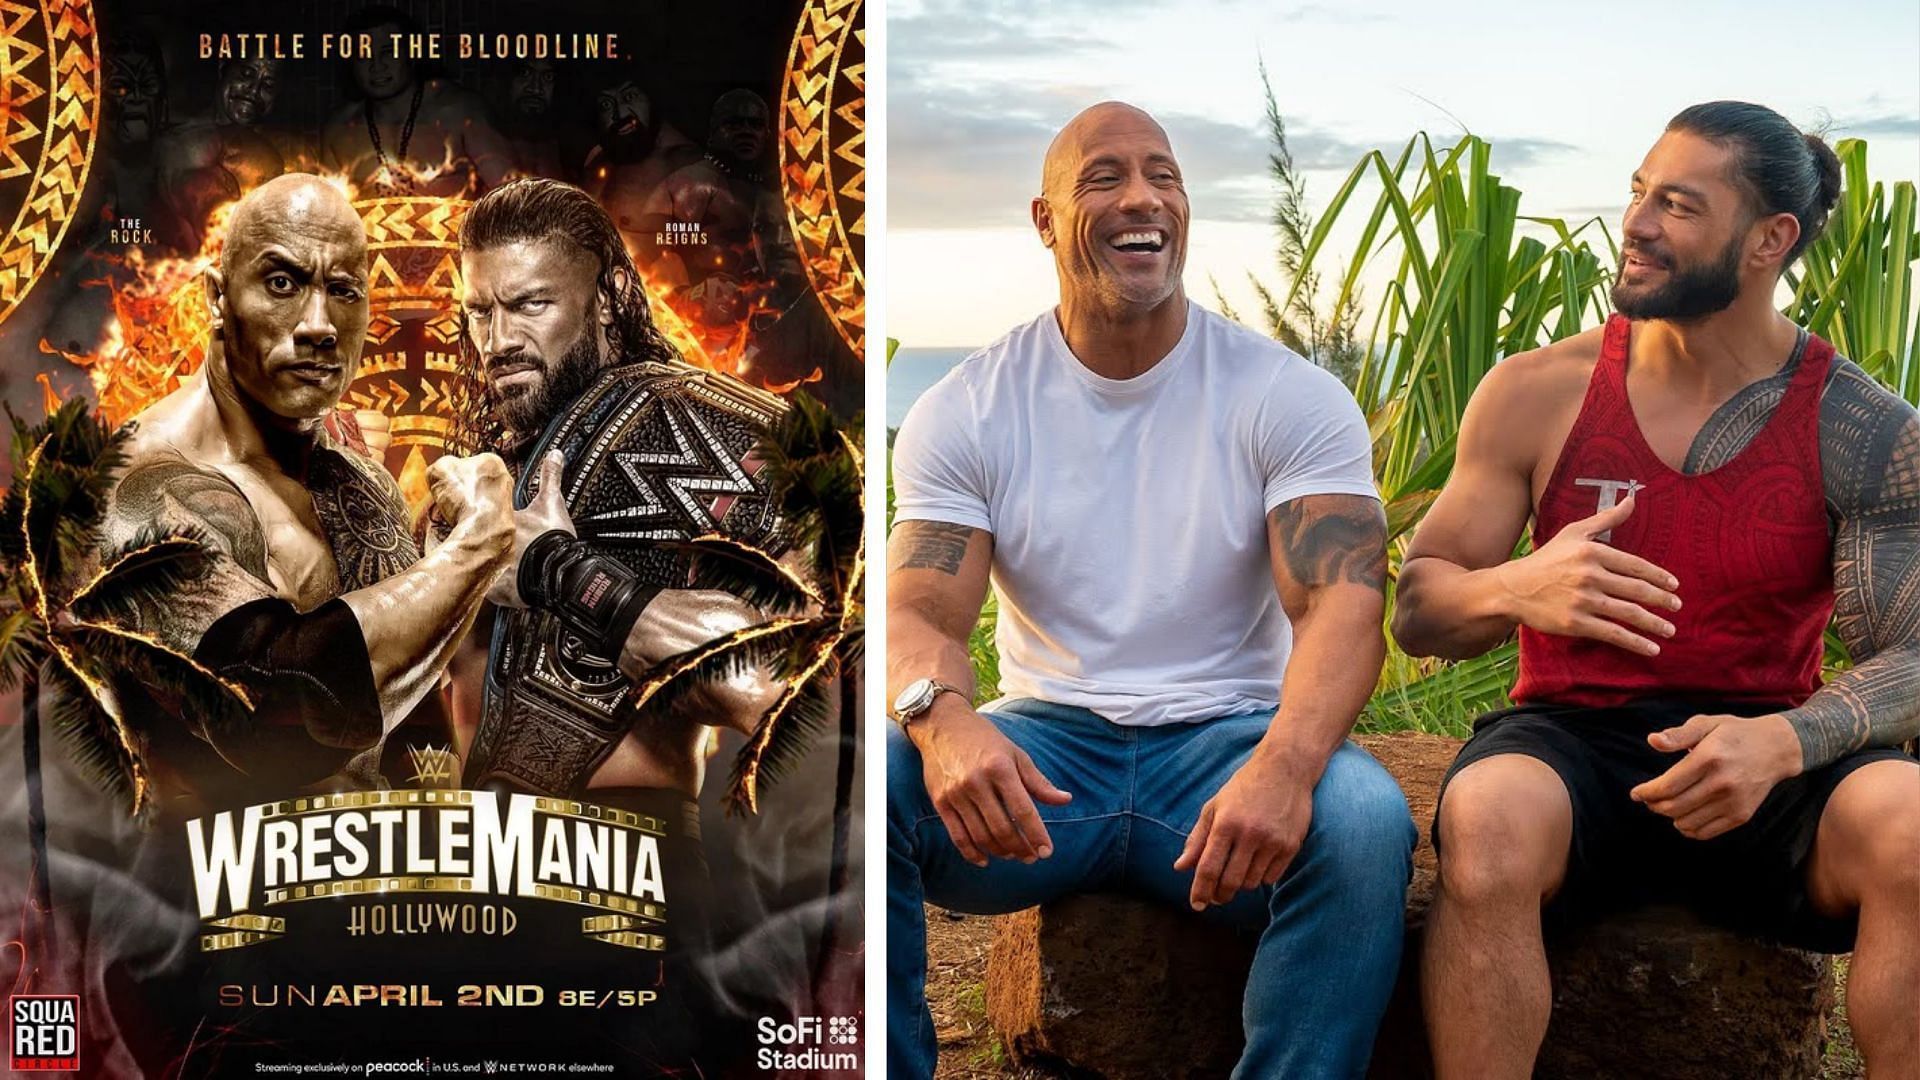 The Rock vs. Roman Reigns could be the main event of WrestleMania 39.